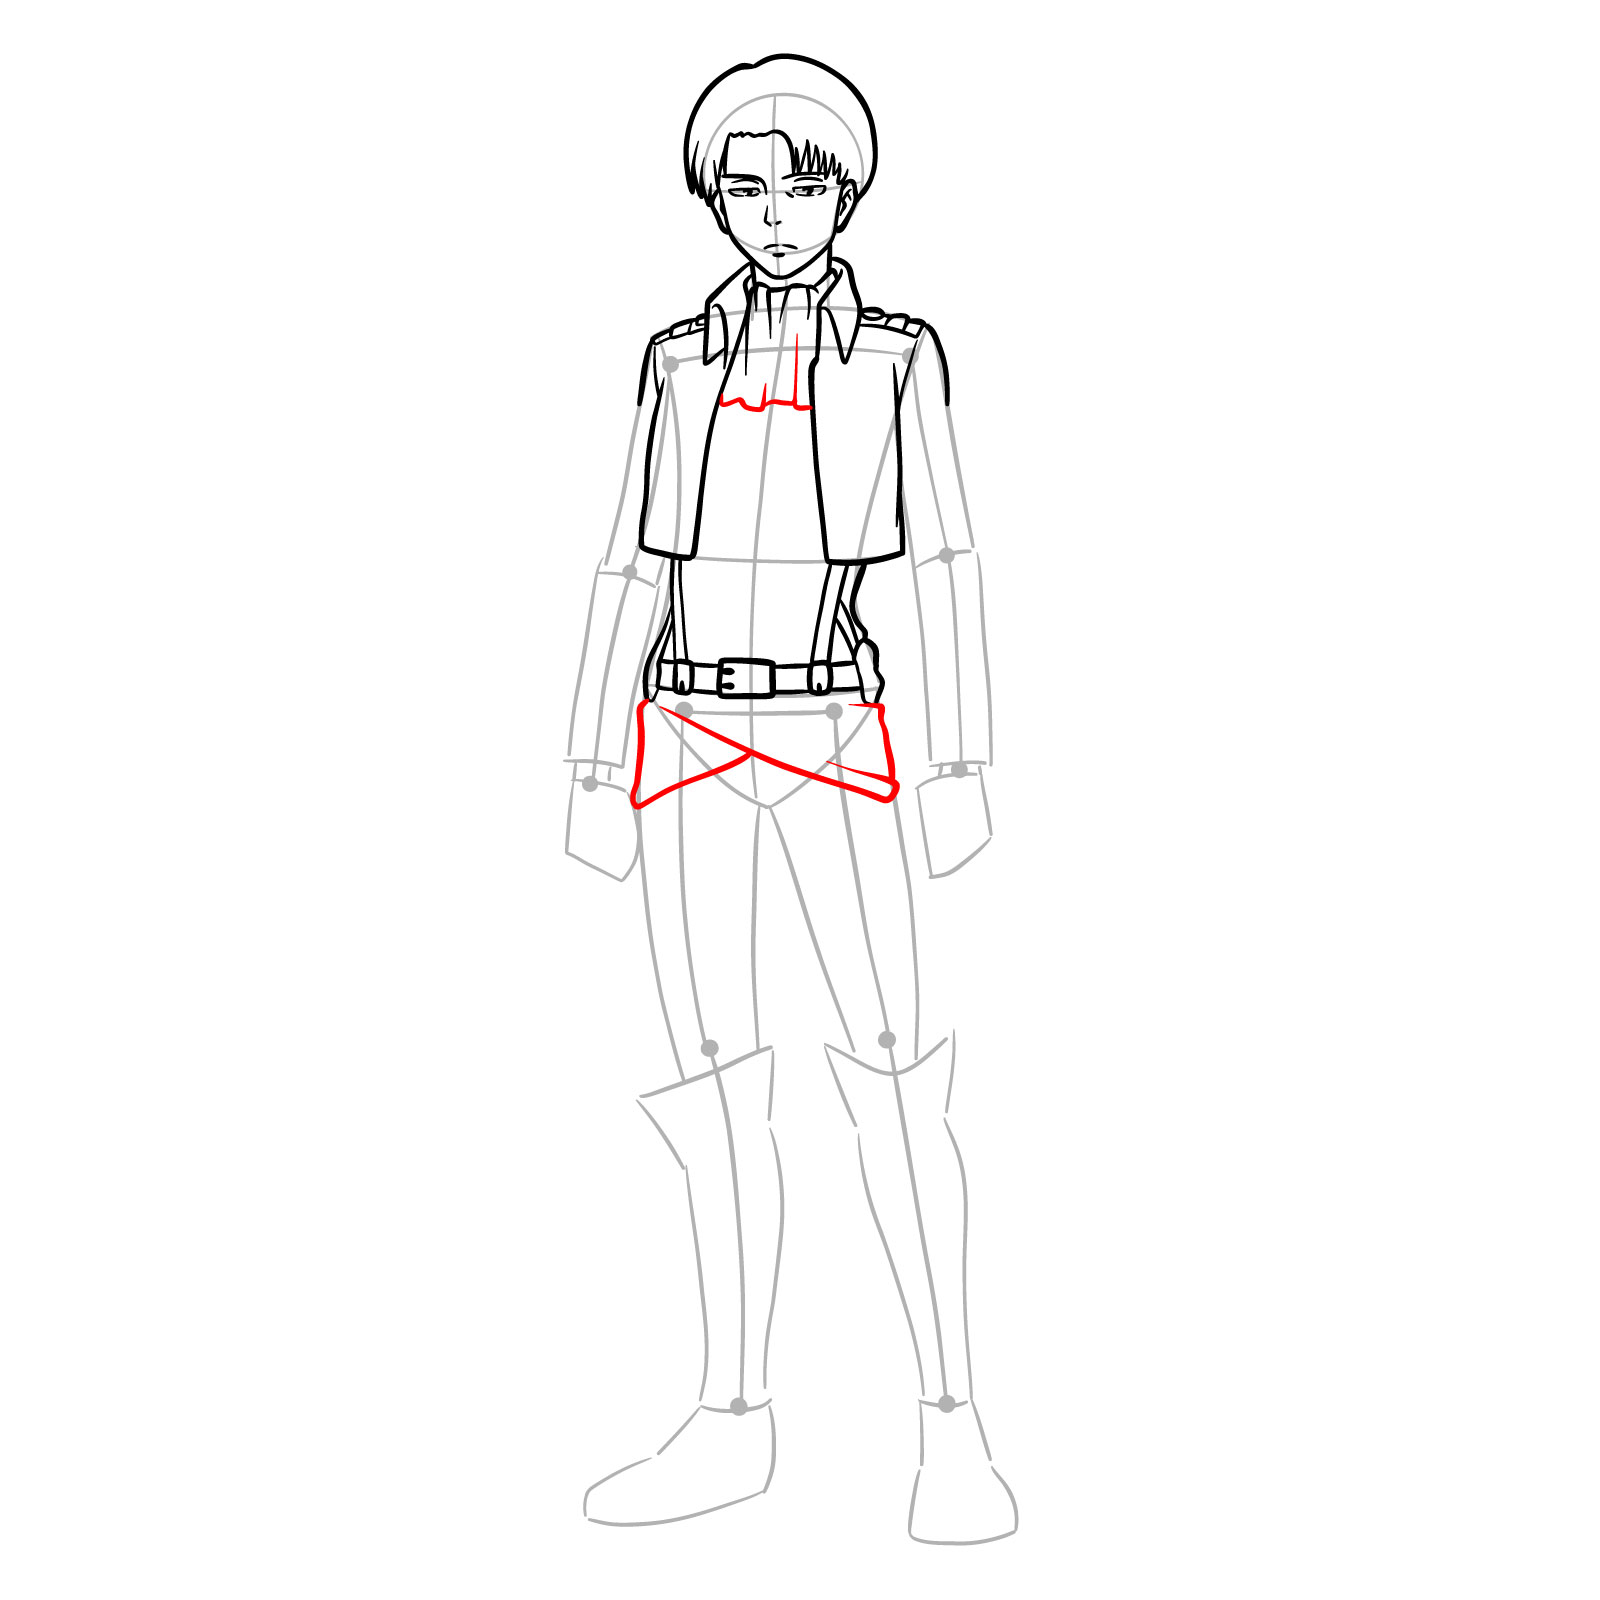 Step-by-step drawing guide for Levi's shirt collar and lower outfit details - step 15